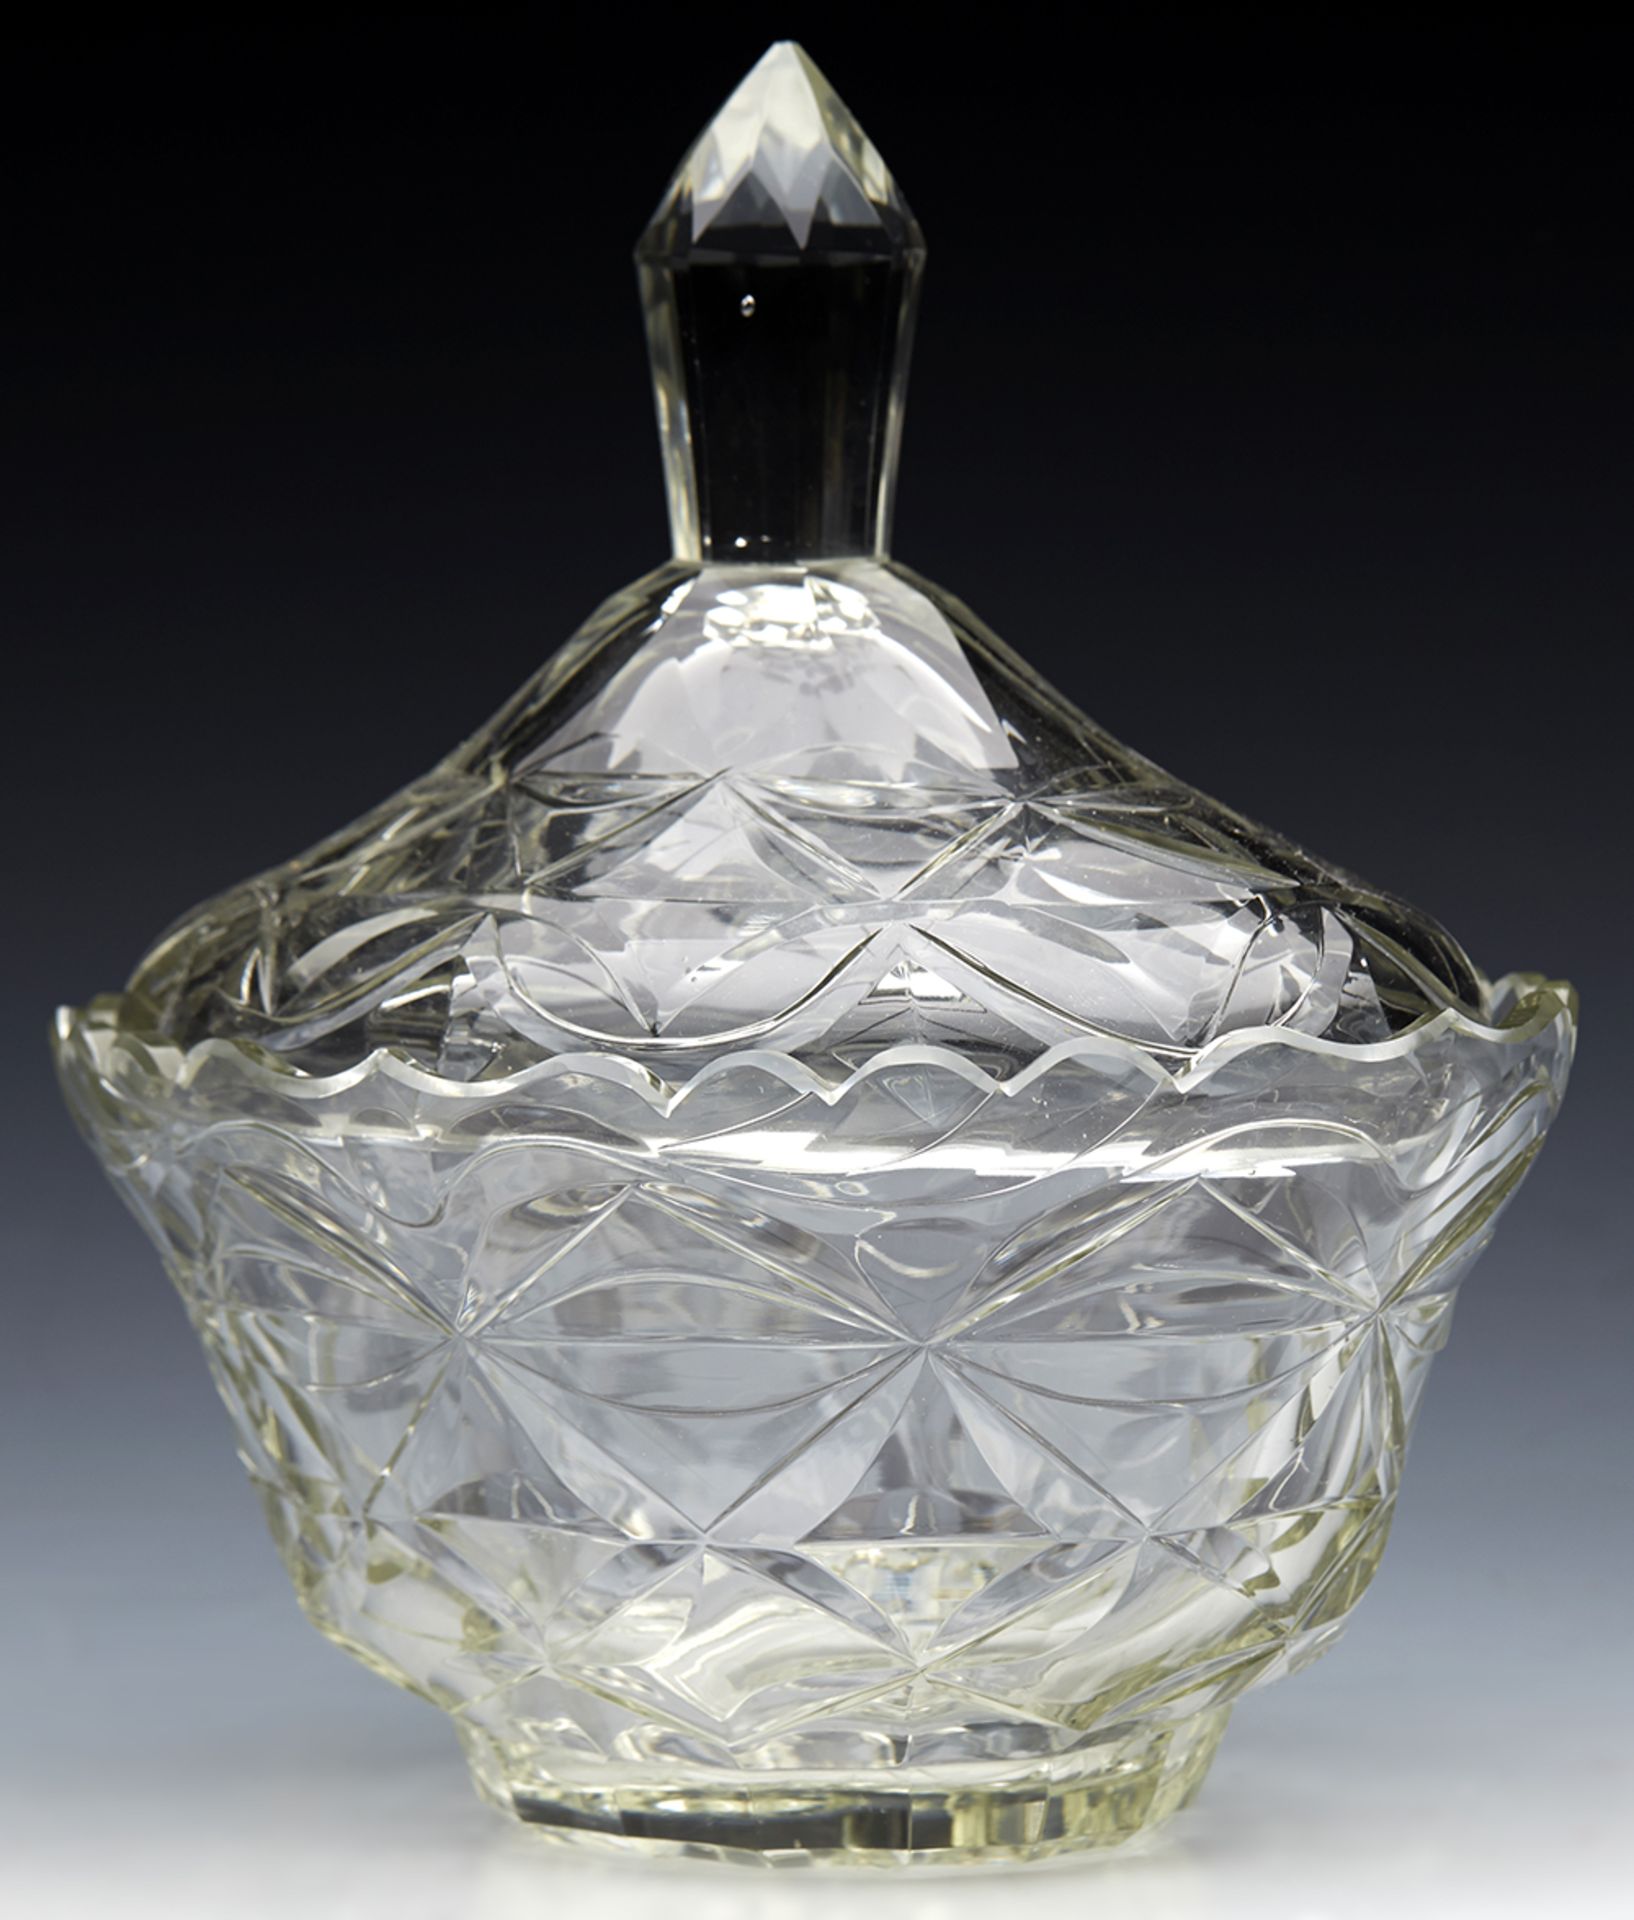 ANTIQUE CUT GLASS LIDDED BUTTER DISH AND STAND EARLY 19TH C.   DIMENSIONS   Height 19cm, Length 25, - Image 15 of 15